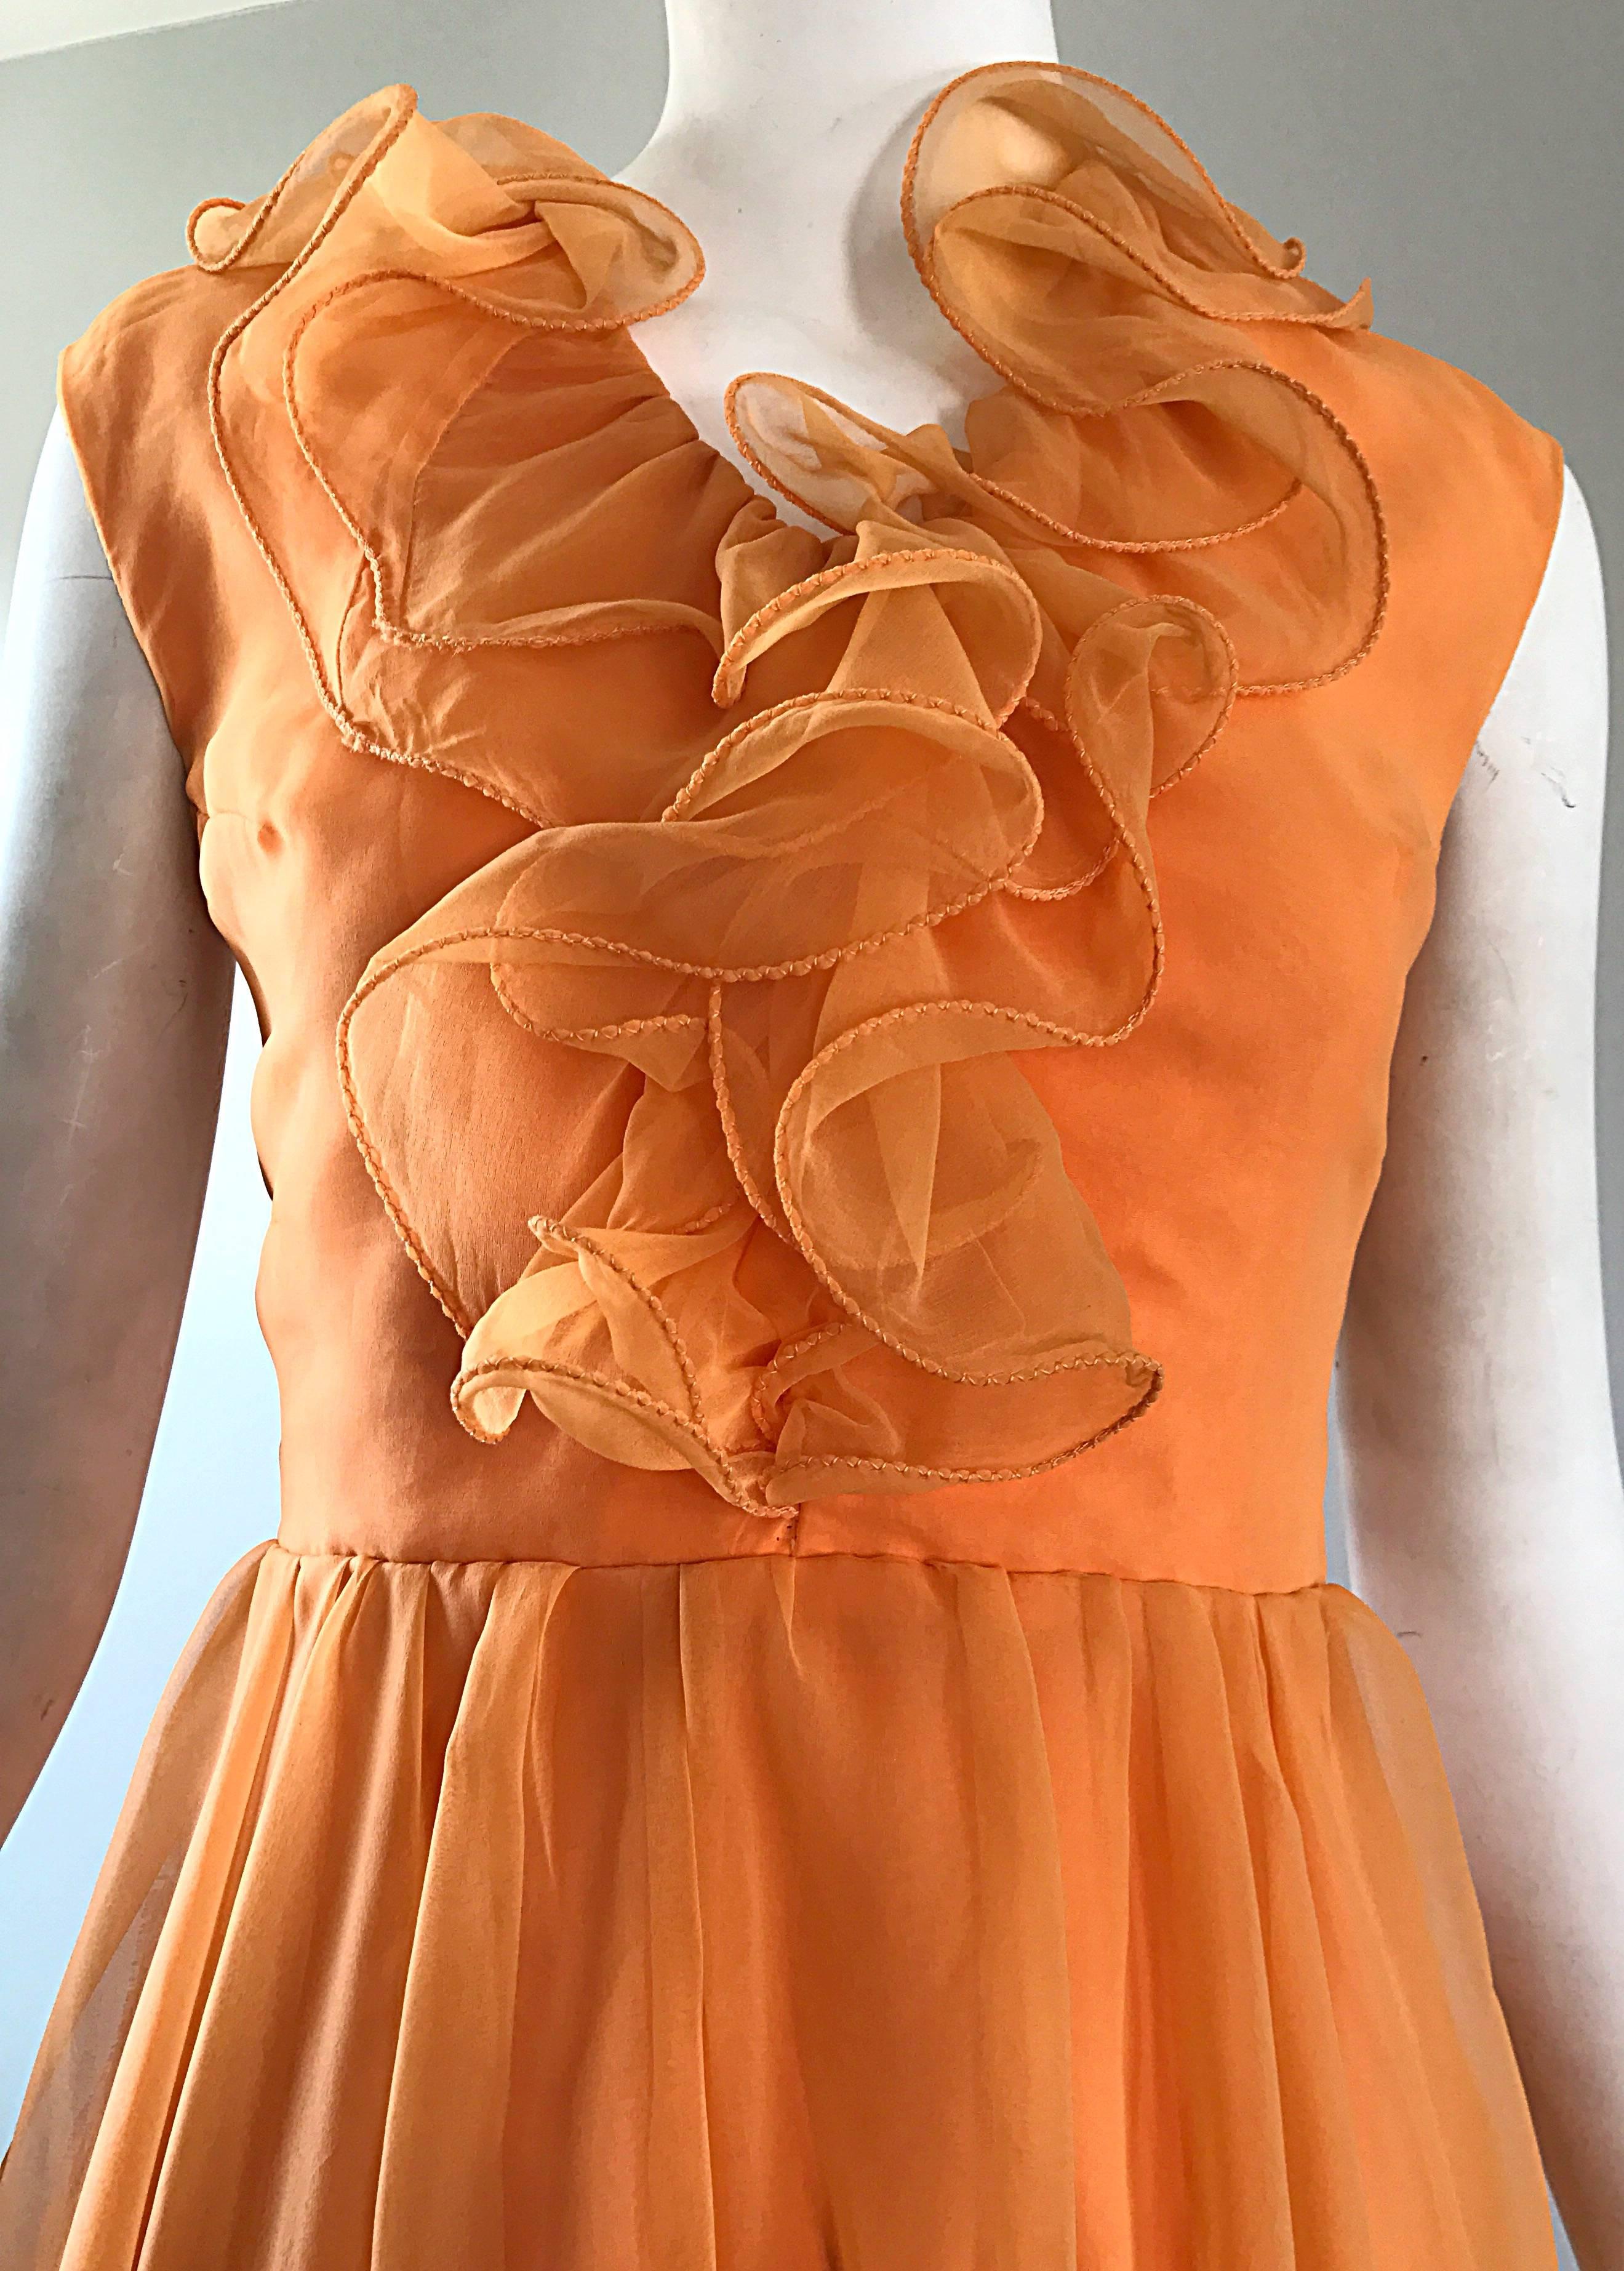 Chic 1960s Sorbert orange chiffon overlay ruffle detailed dress! Features a fitted tailored bodice, with a forgiving flattering full skirt. Full metal zipper up the back with hook-and-eye closure. Fully lined.Perfect for day or evening. Can be worn